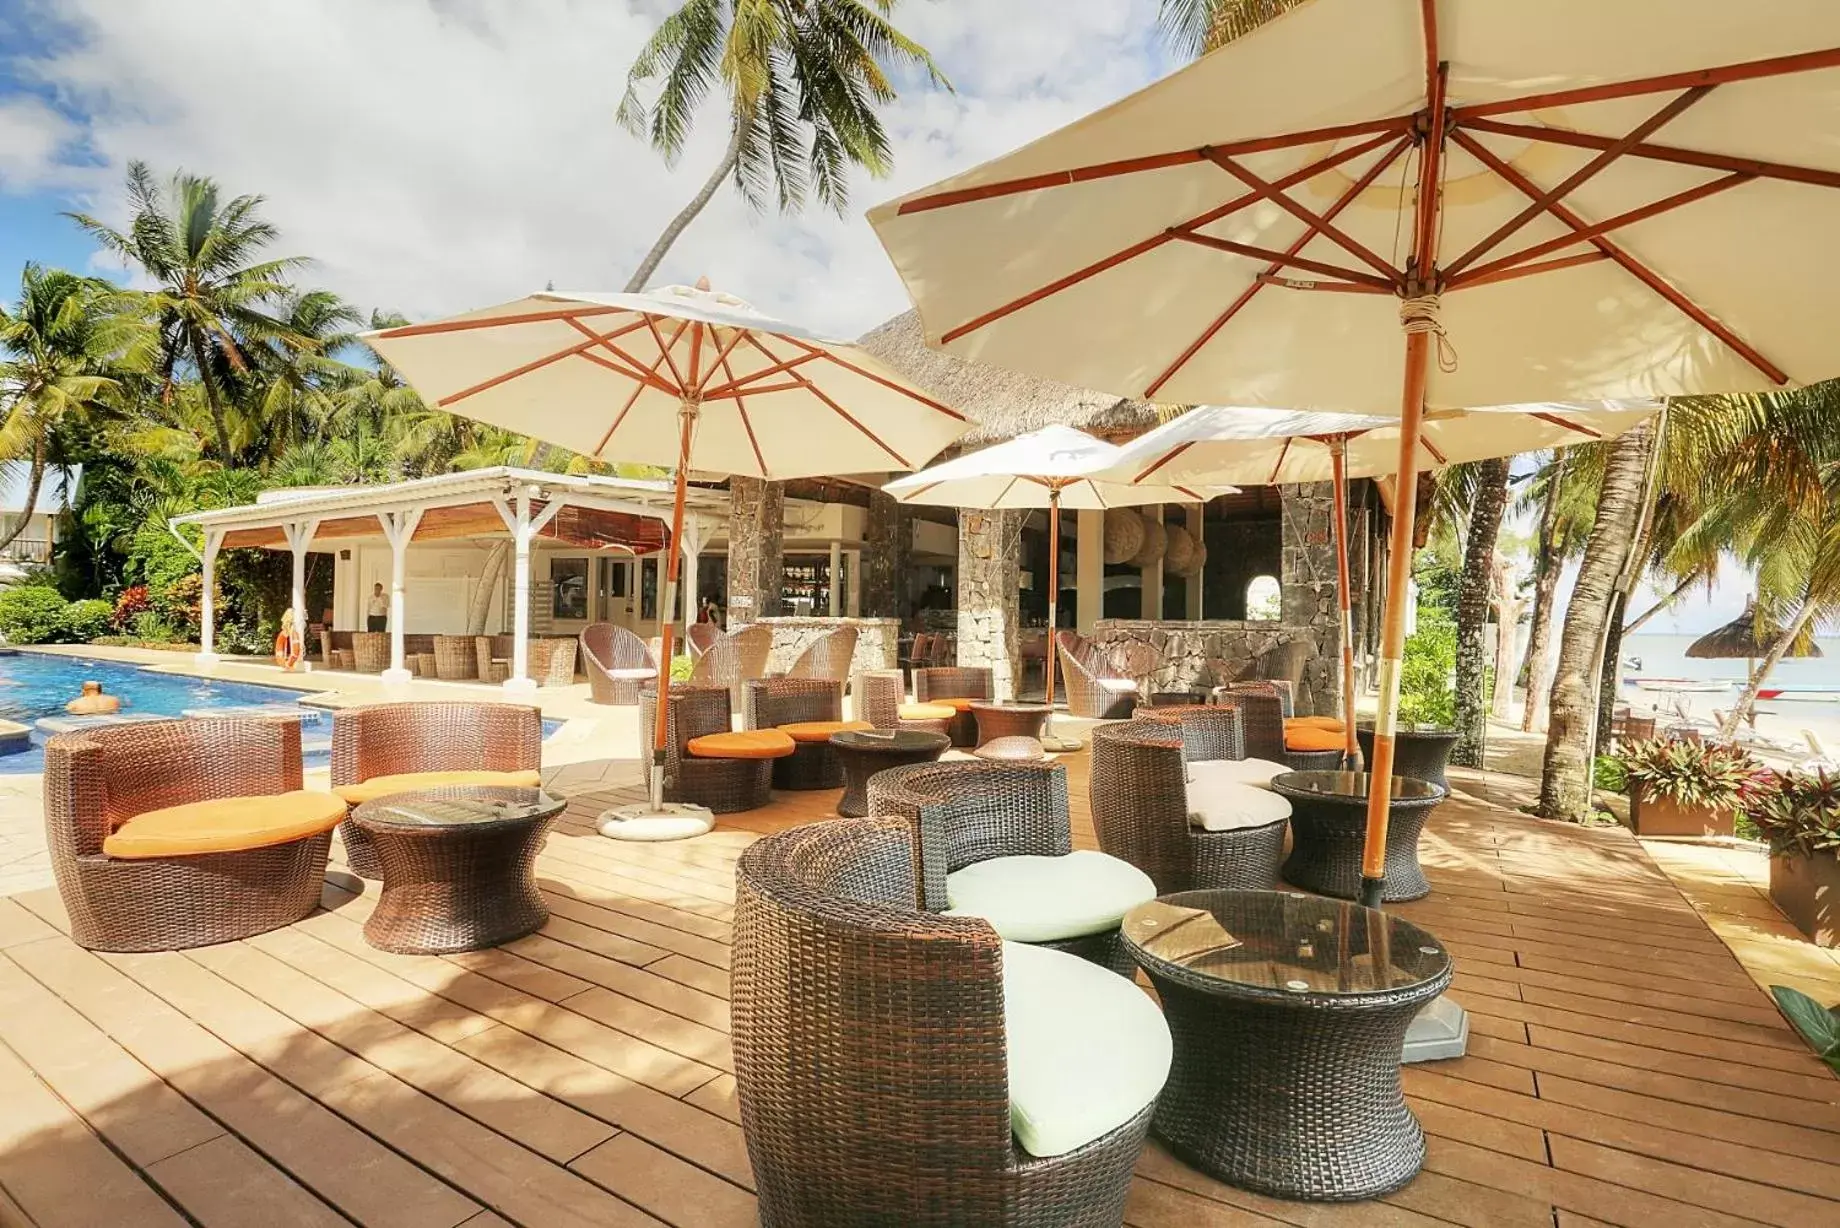 Patio in Cocotiers Hotel – Mauritius